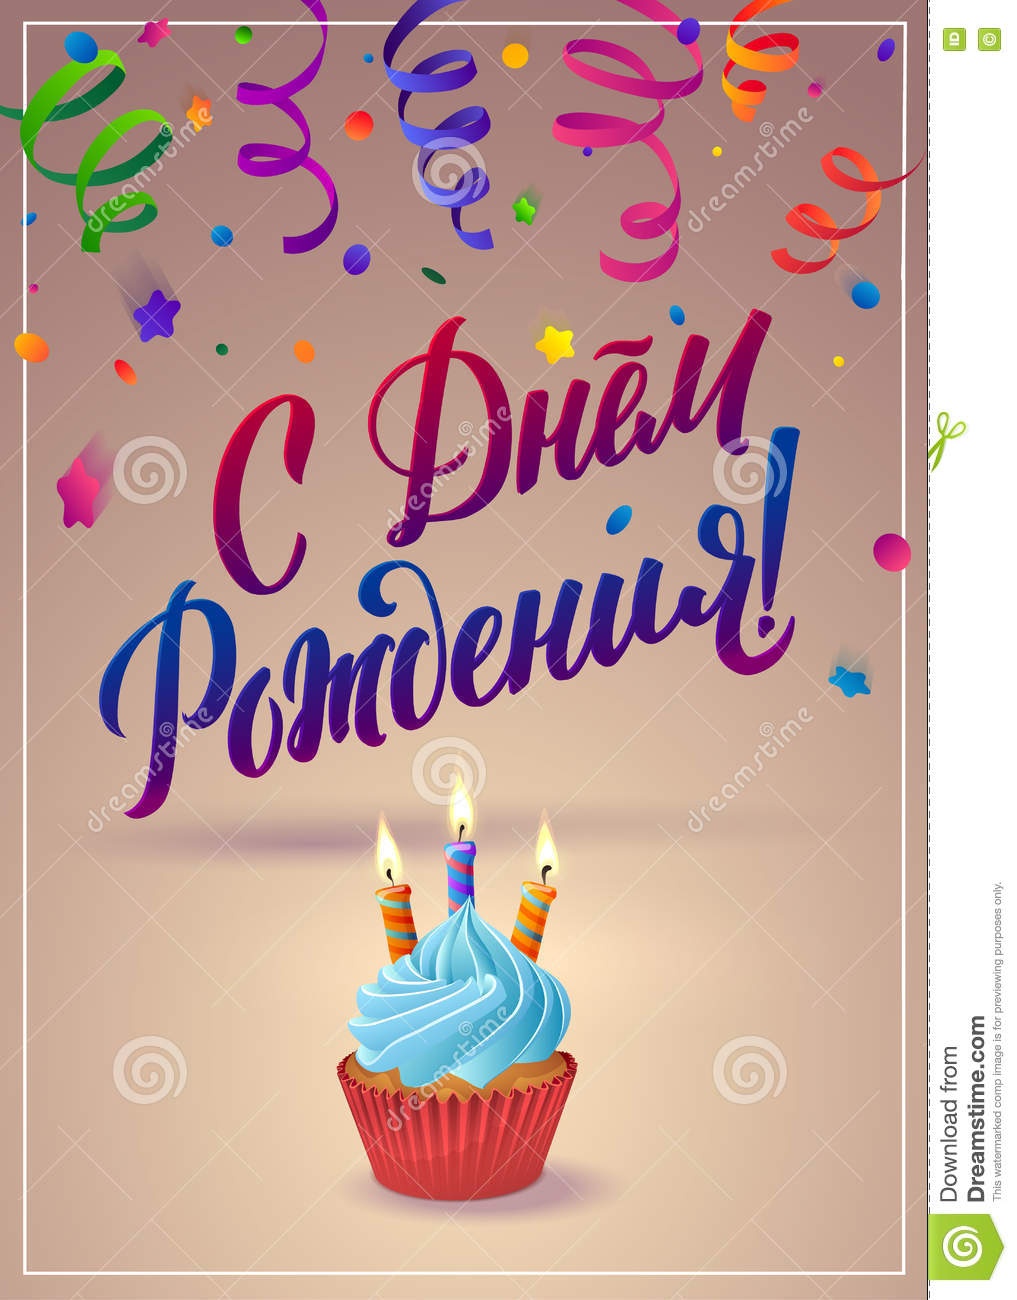 96+ Funny Russian Birthday Cards - Love Cards Funny Card Greeting - Free Printable Russian Birthday Cards